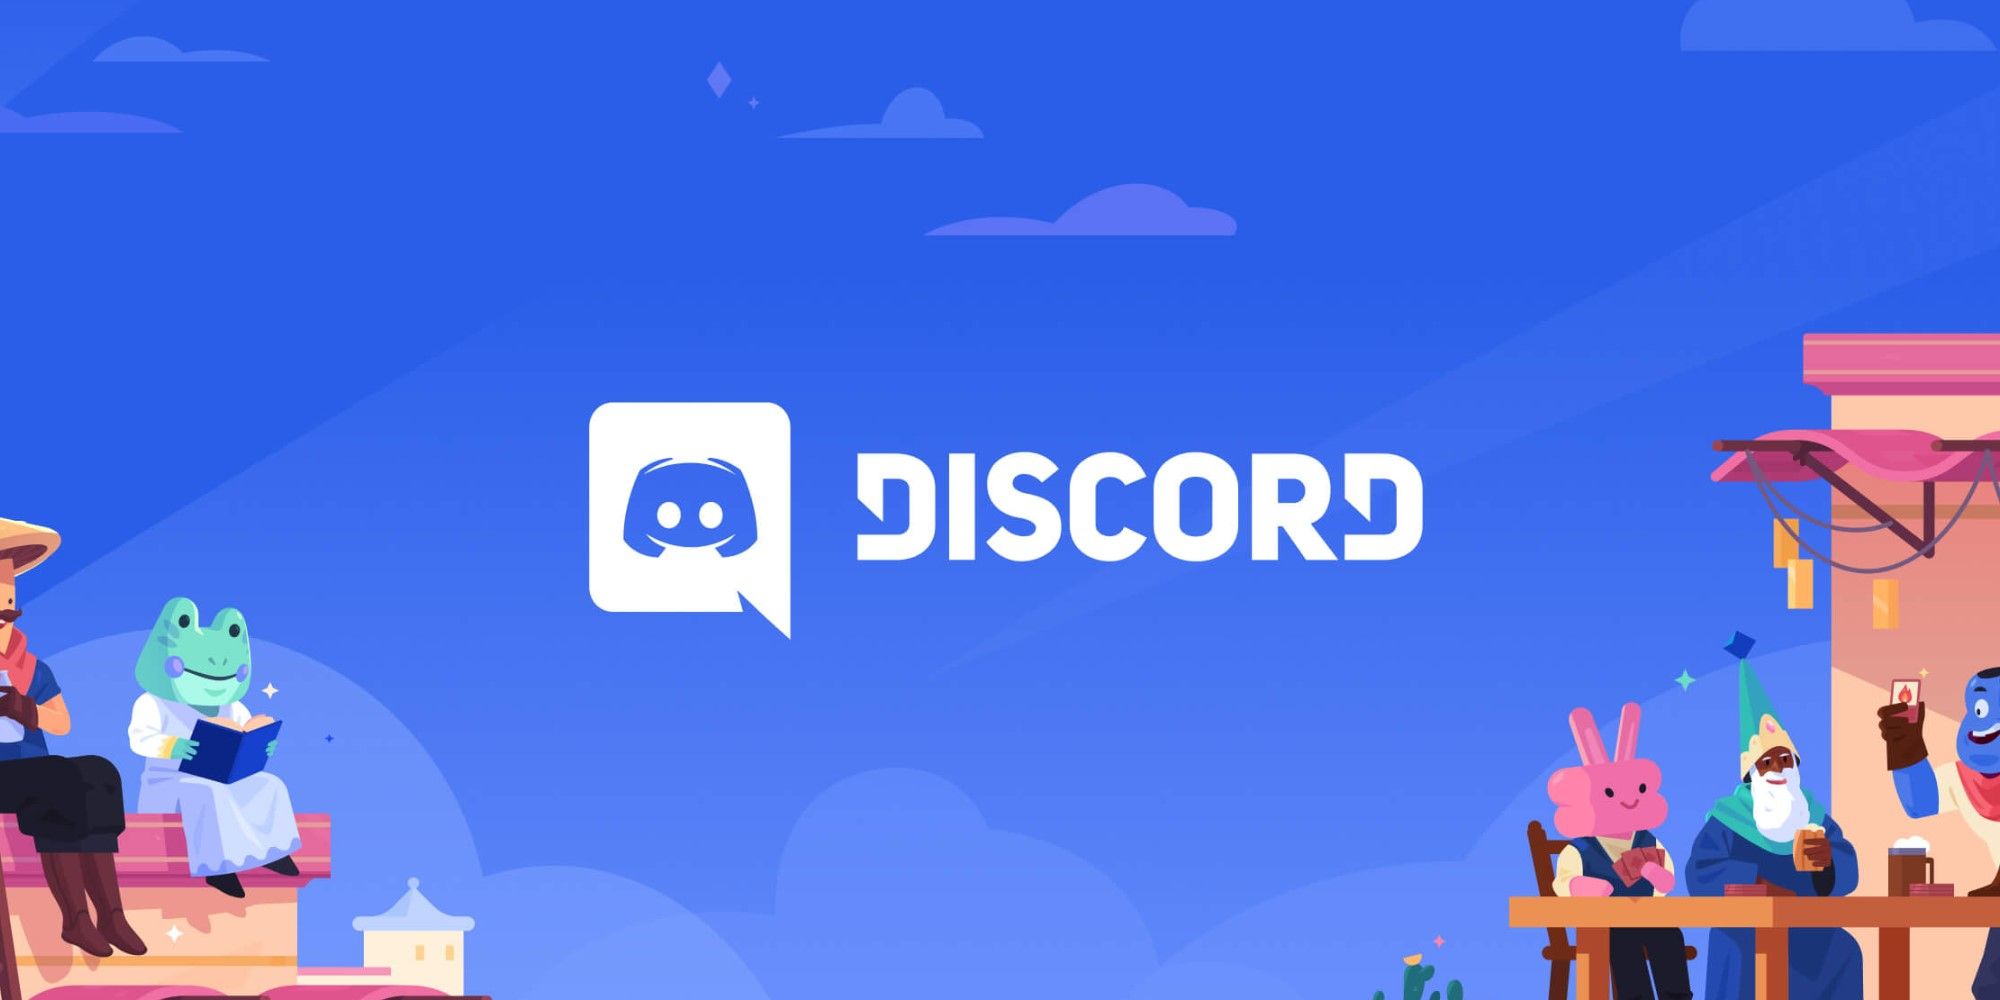 PlayStation’s Discord Integration Rumored To Release In March 2023